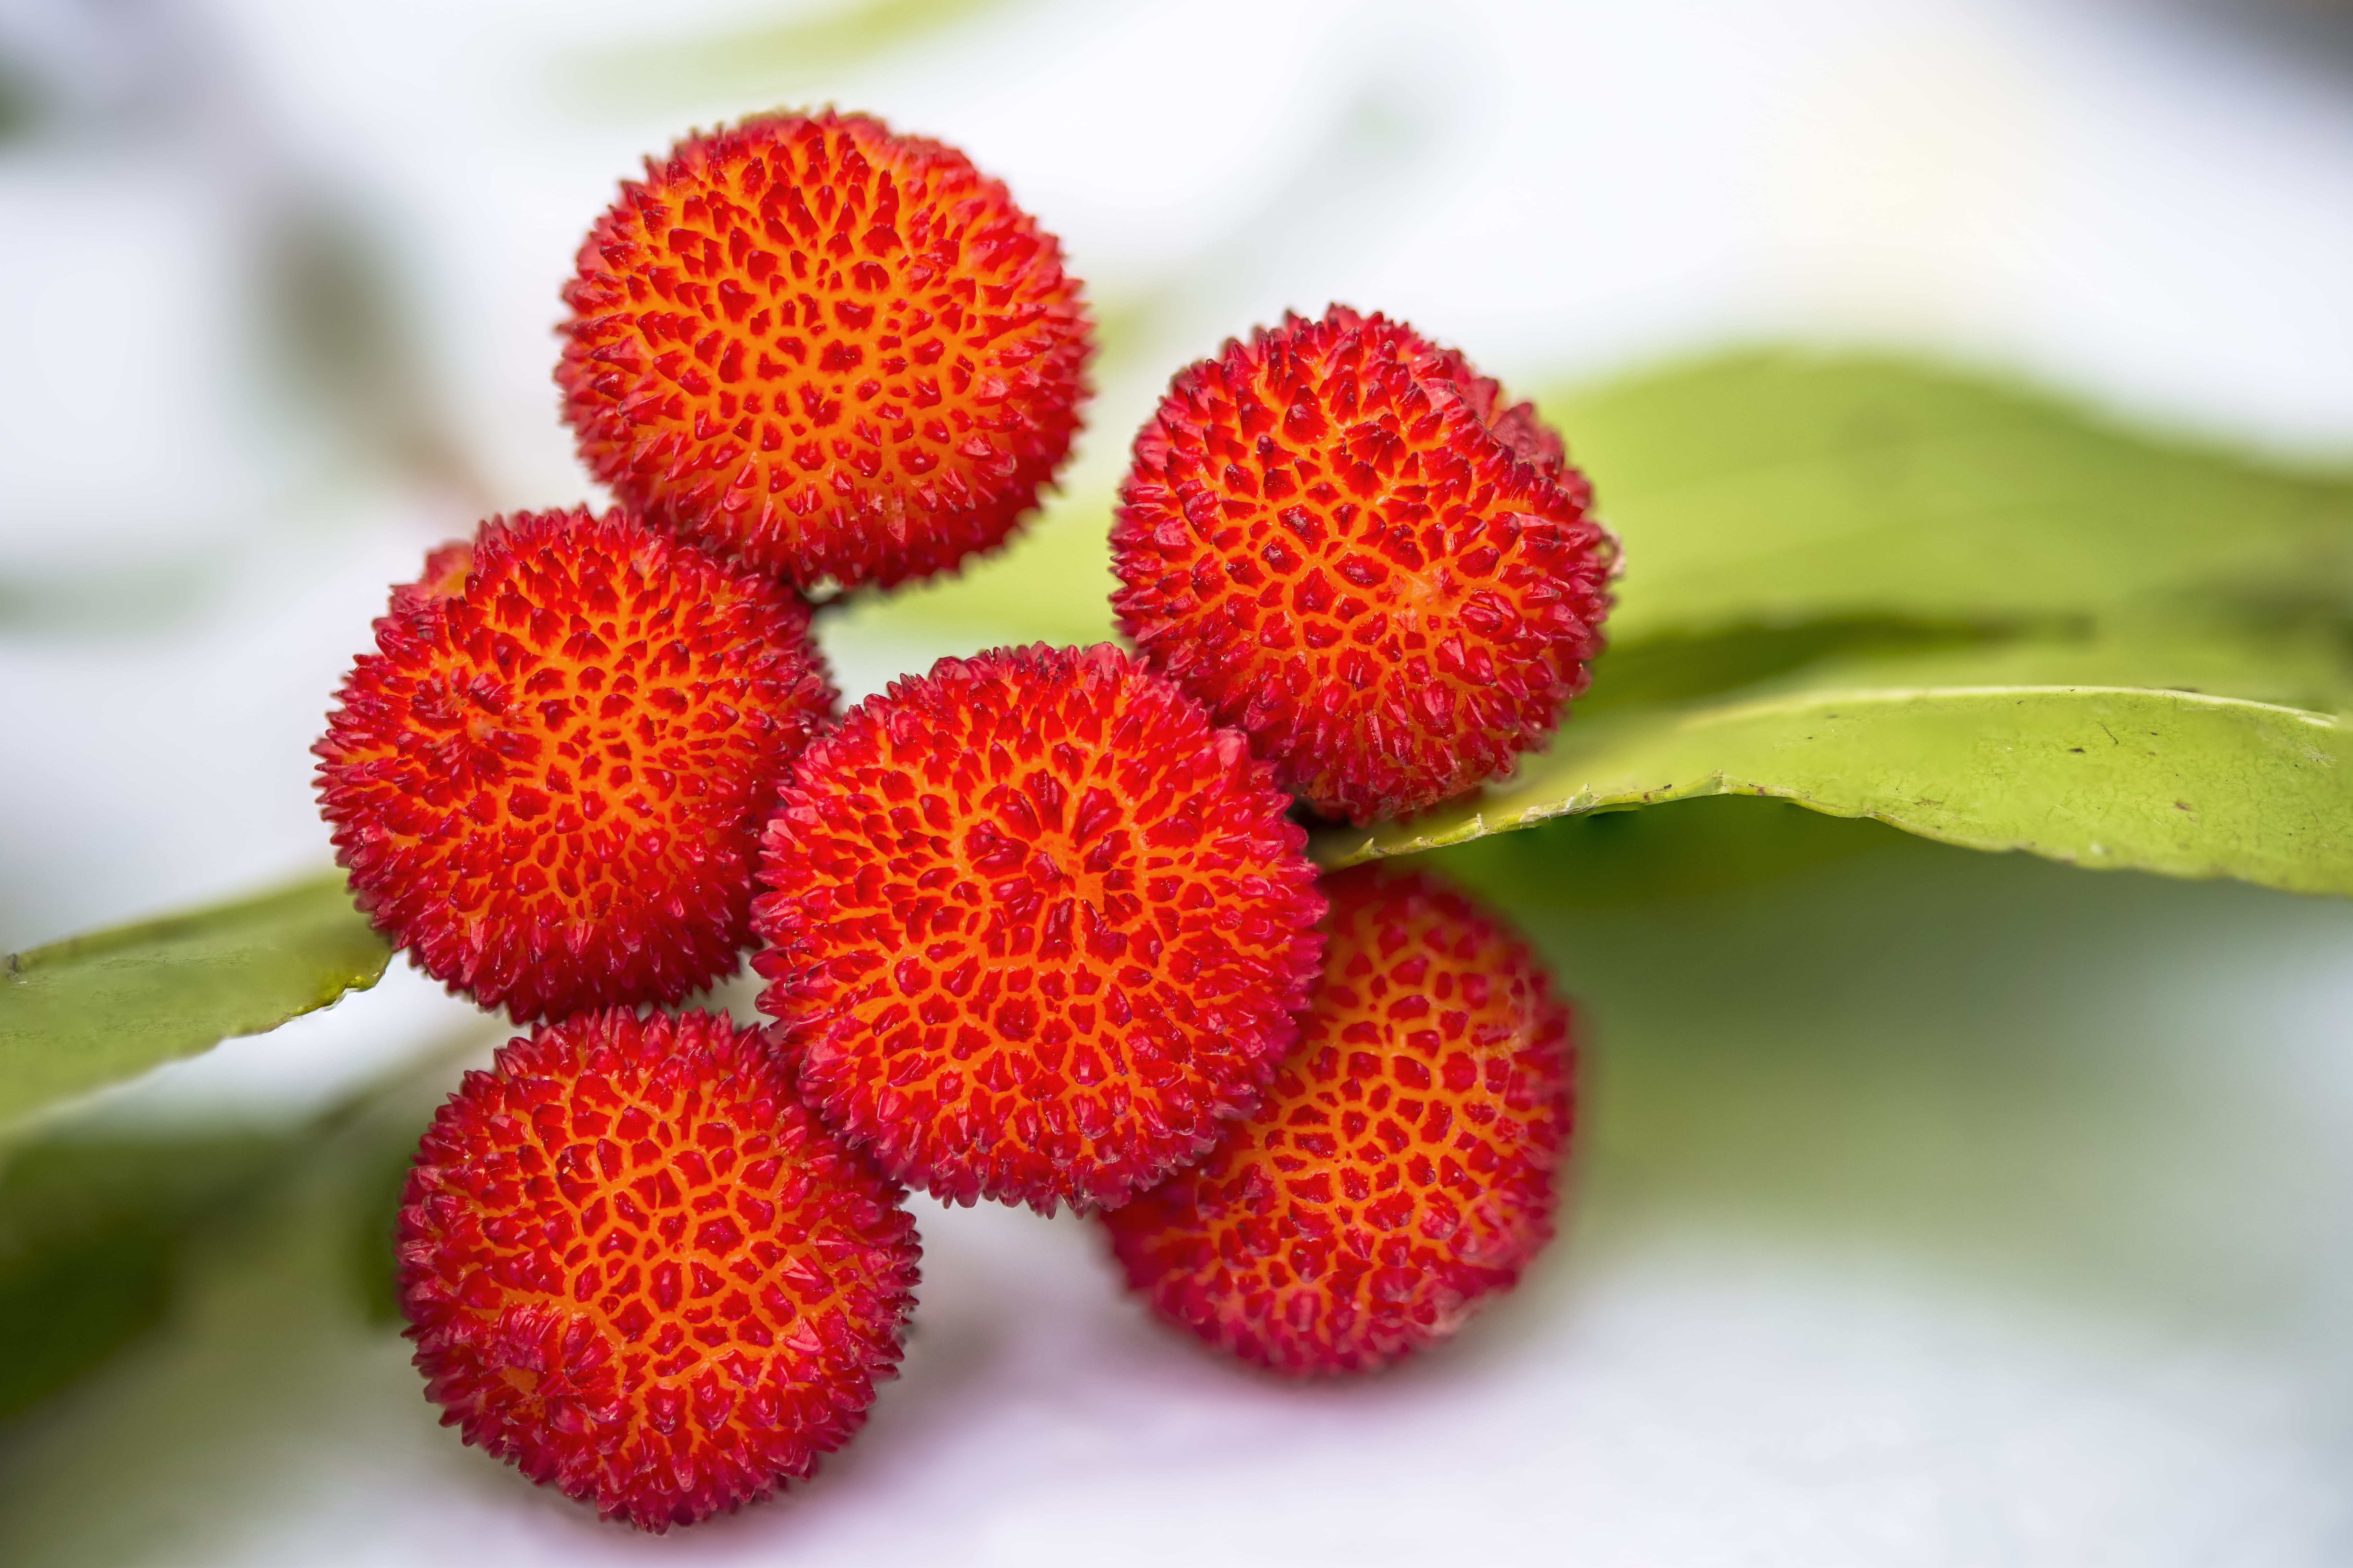 macro photography of red lychee fruits